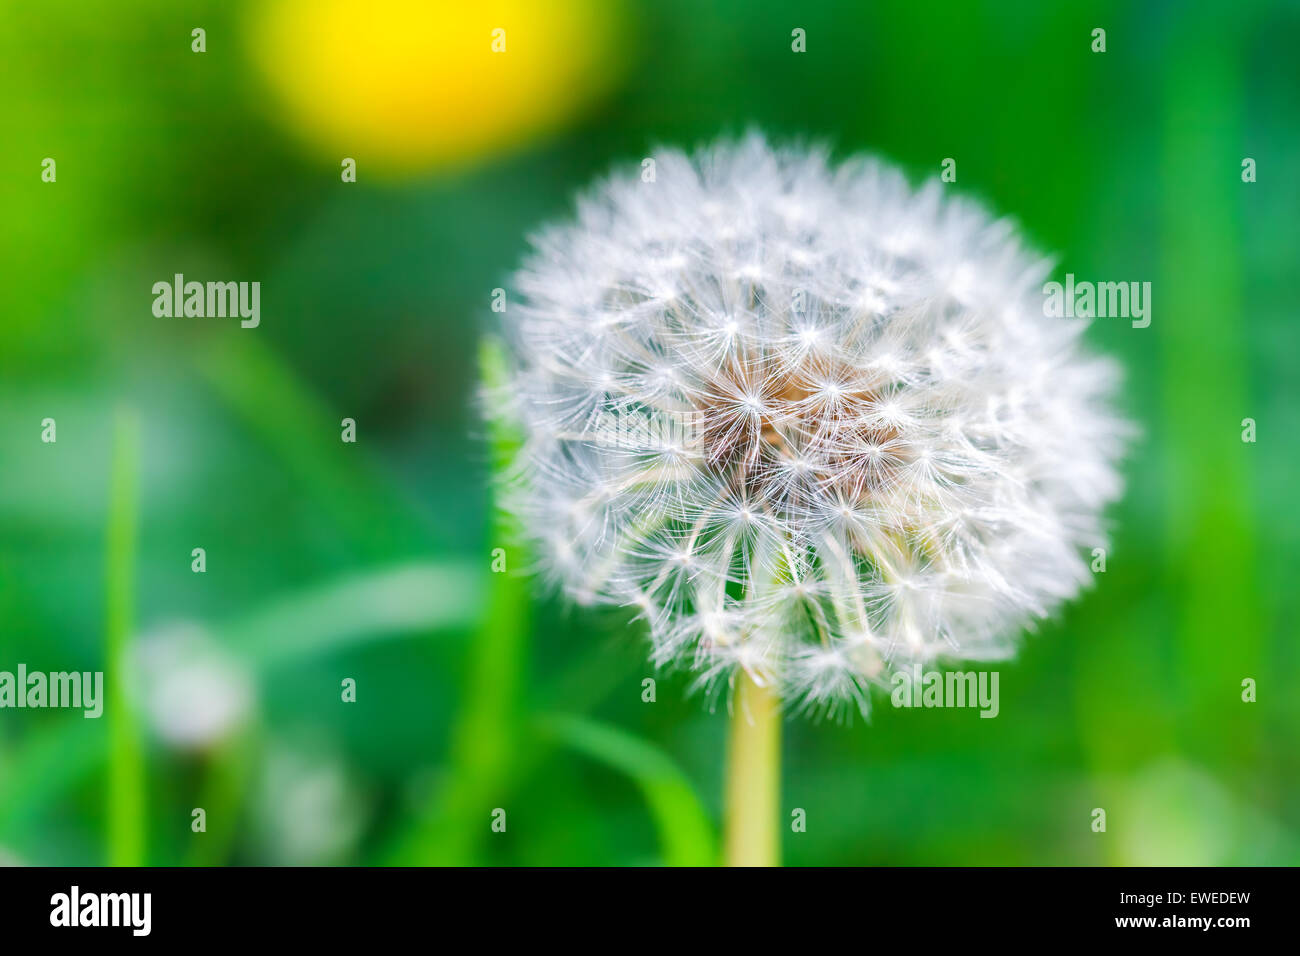 Dandelion flower with fluff, macro photo on bright green background with selective focus Stock Photo